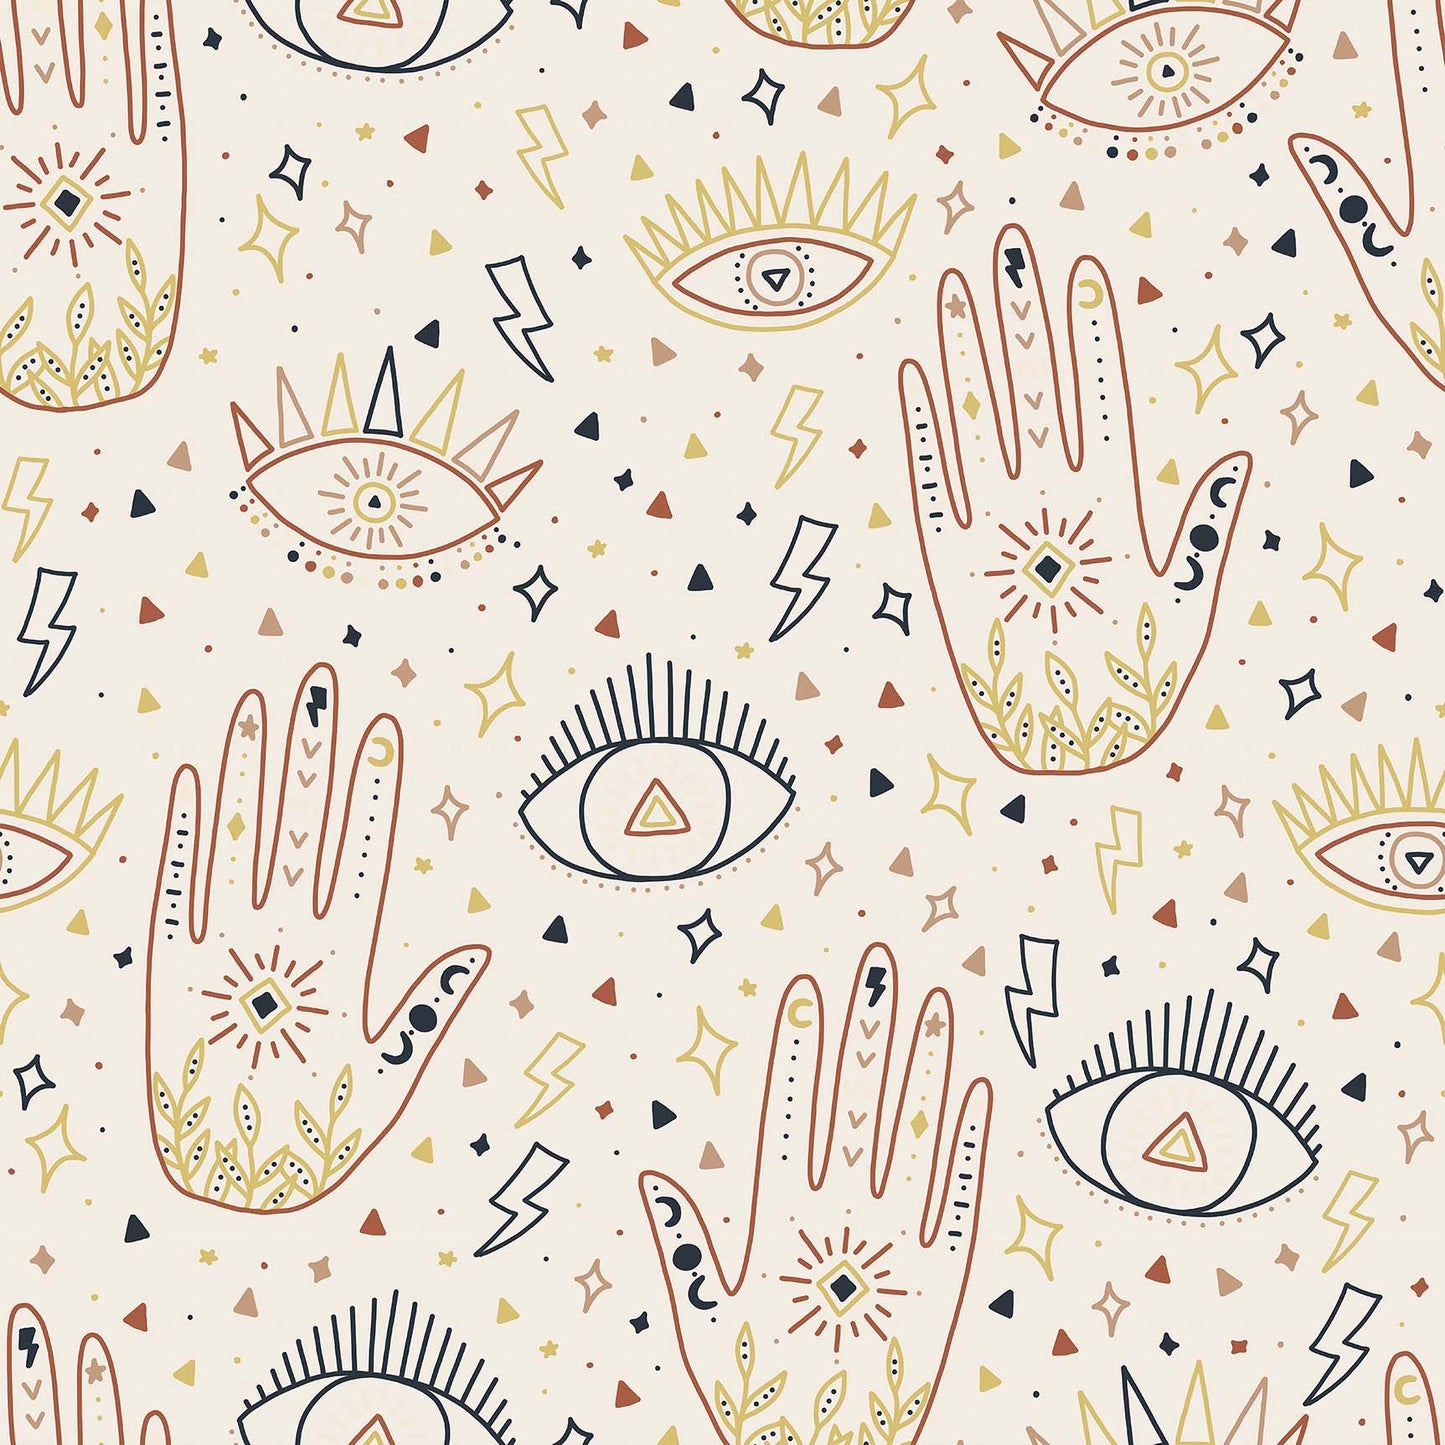 Going Boho Blue Red Mustard Eye and Hand Self-Adhesive Vinyl Wrap by RestoWrap